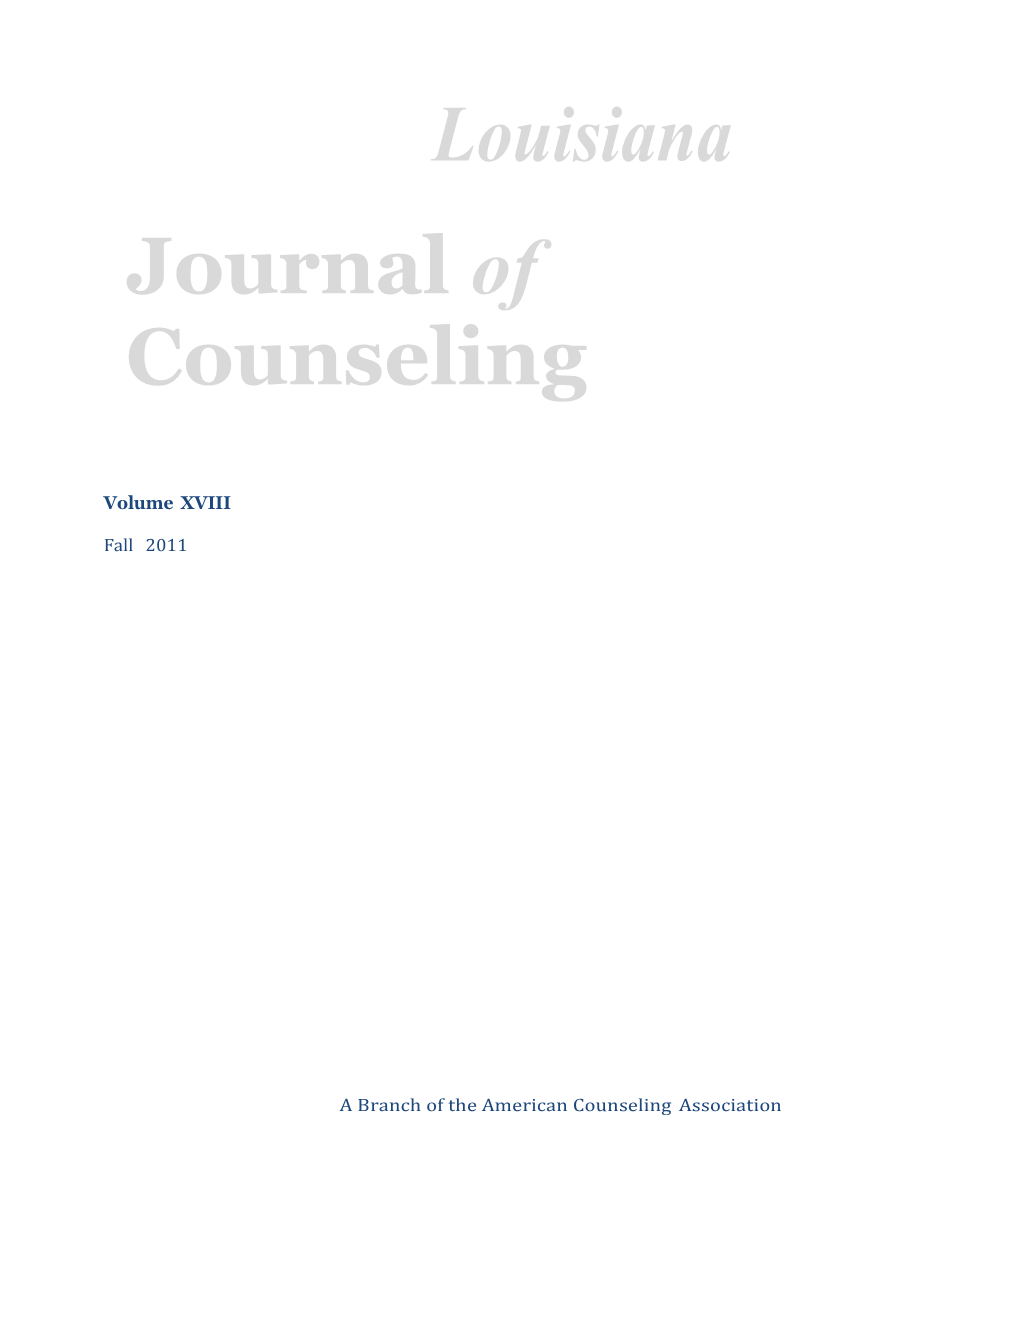 A Branch of the American Counselingassociation